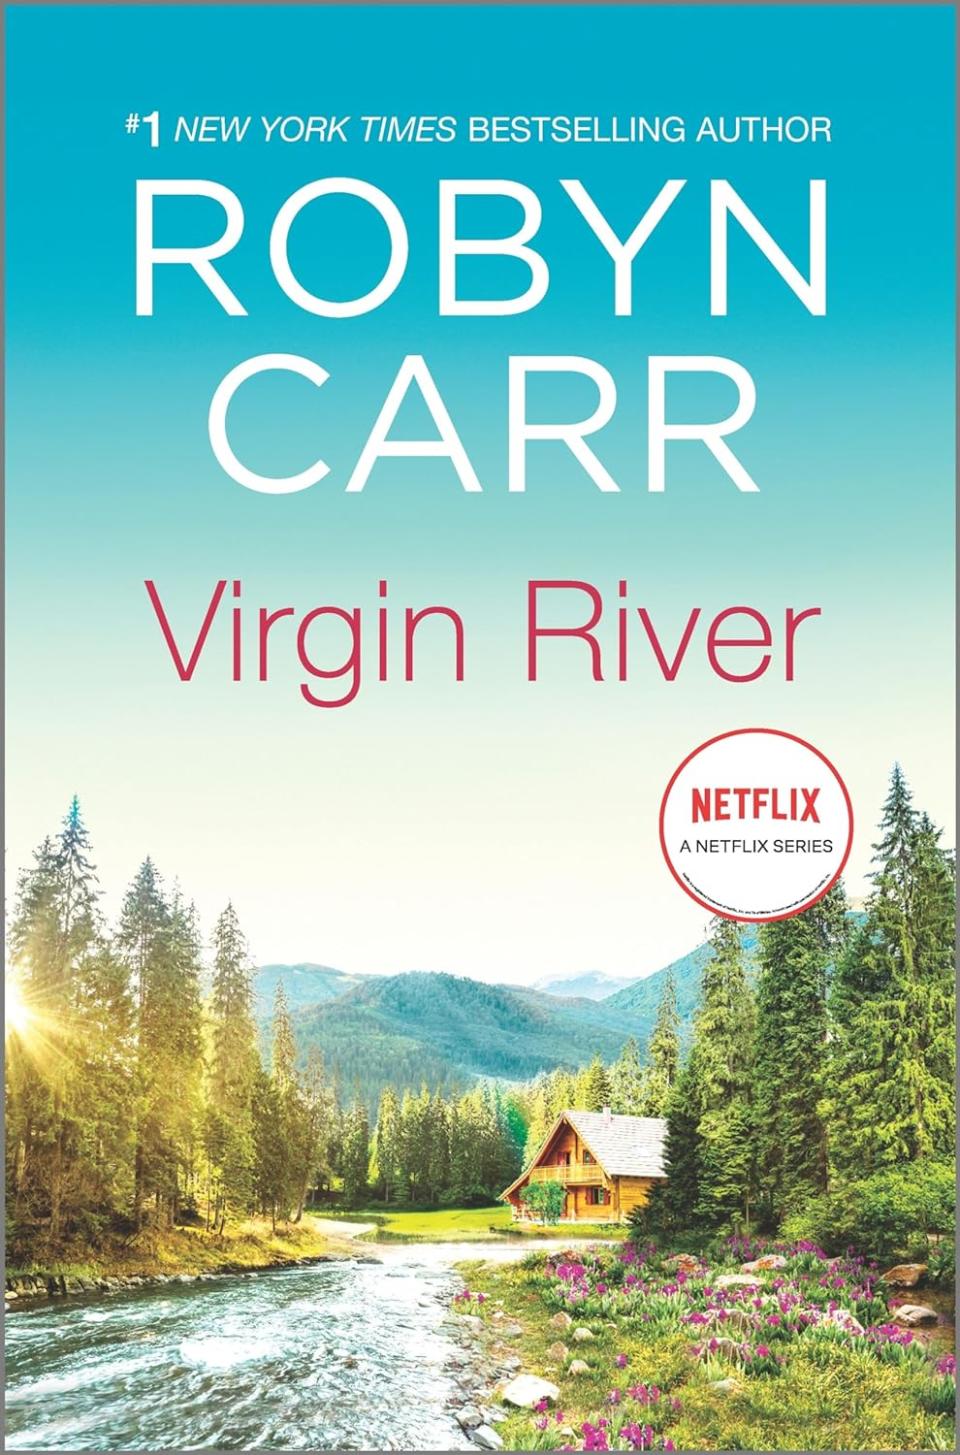 Virgin River by Robyn Carr